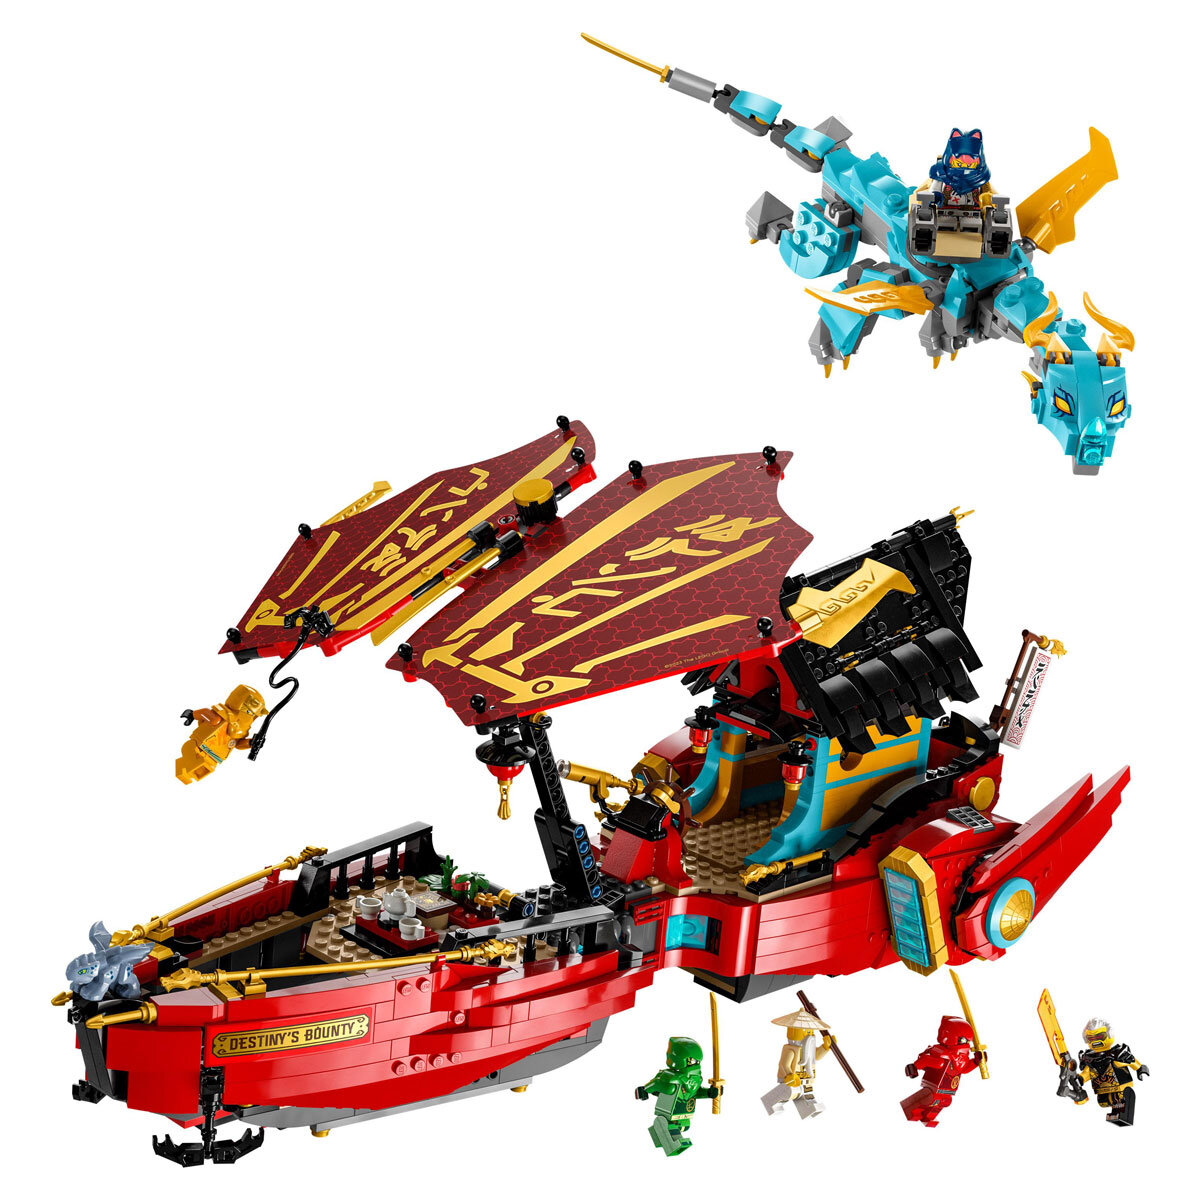 Buy LEGO Destiny's Bounty - race against time Overview Image at Costco.co.uk